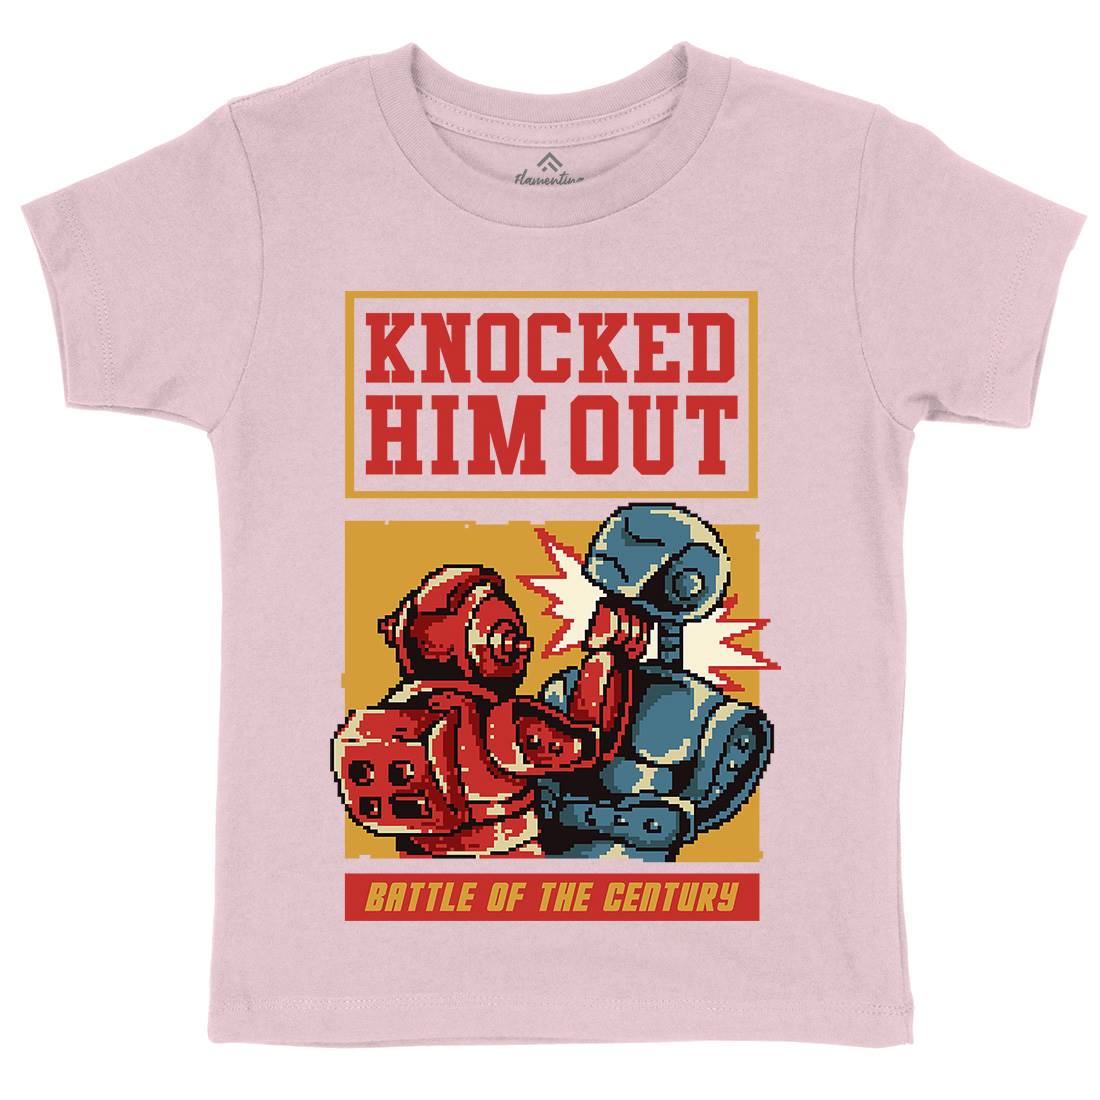 Knocked Him Out Kids Organic Crew Neck T-Shirt Space B923